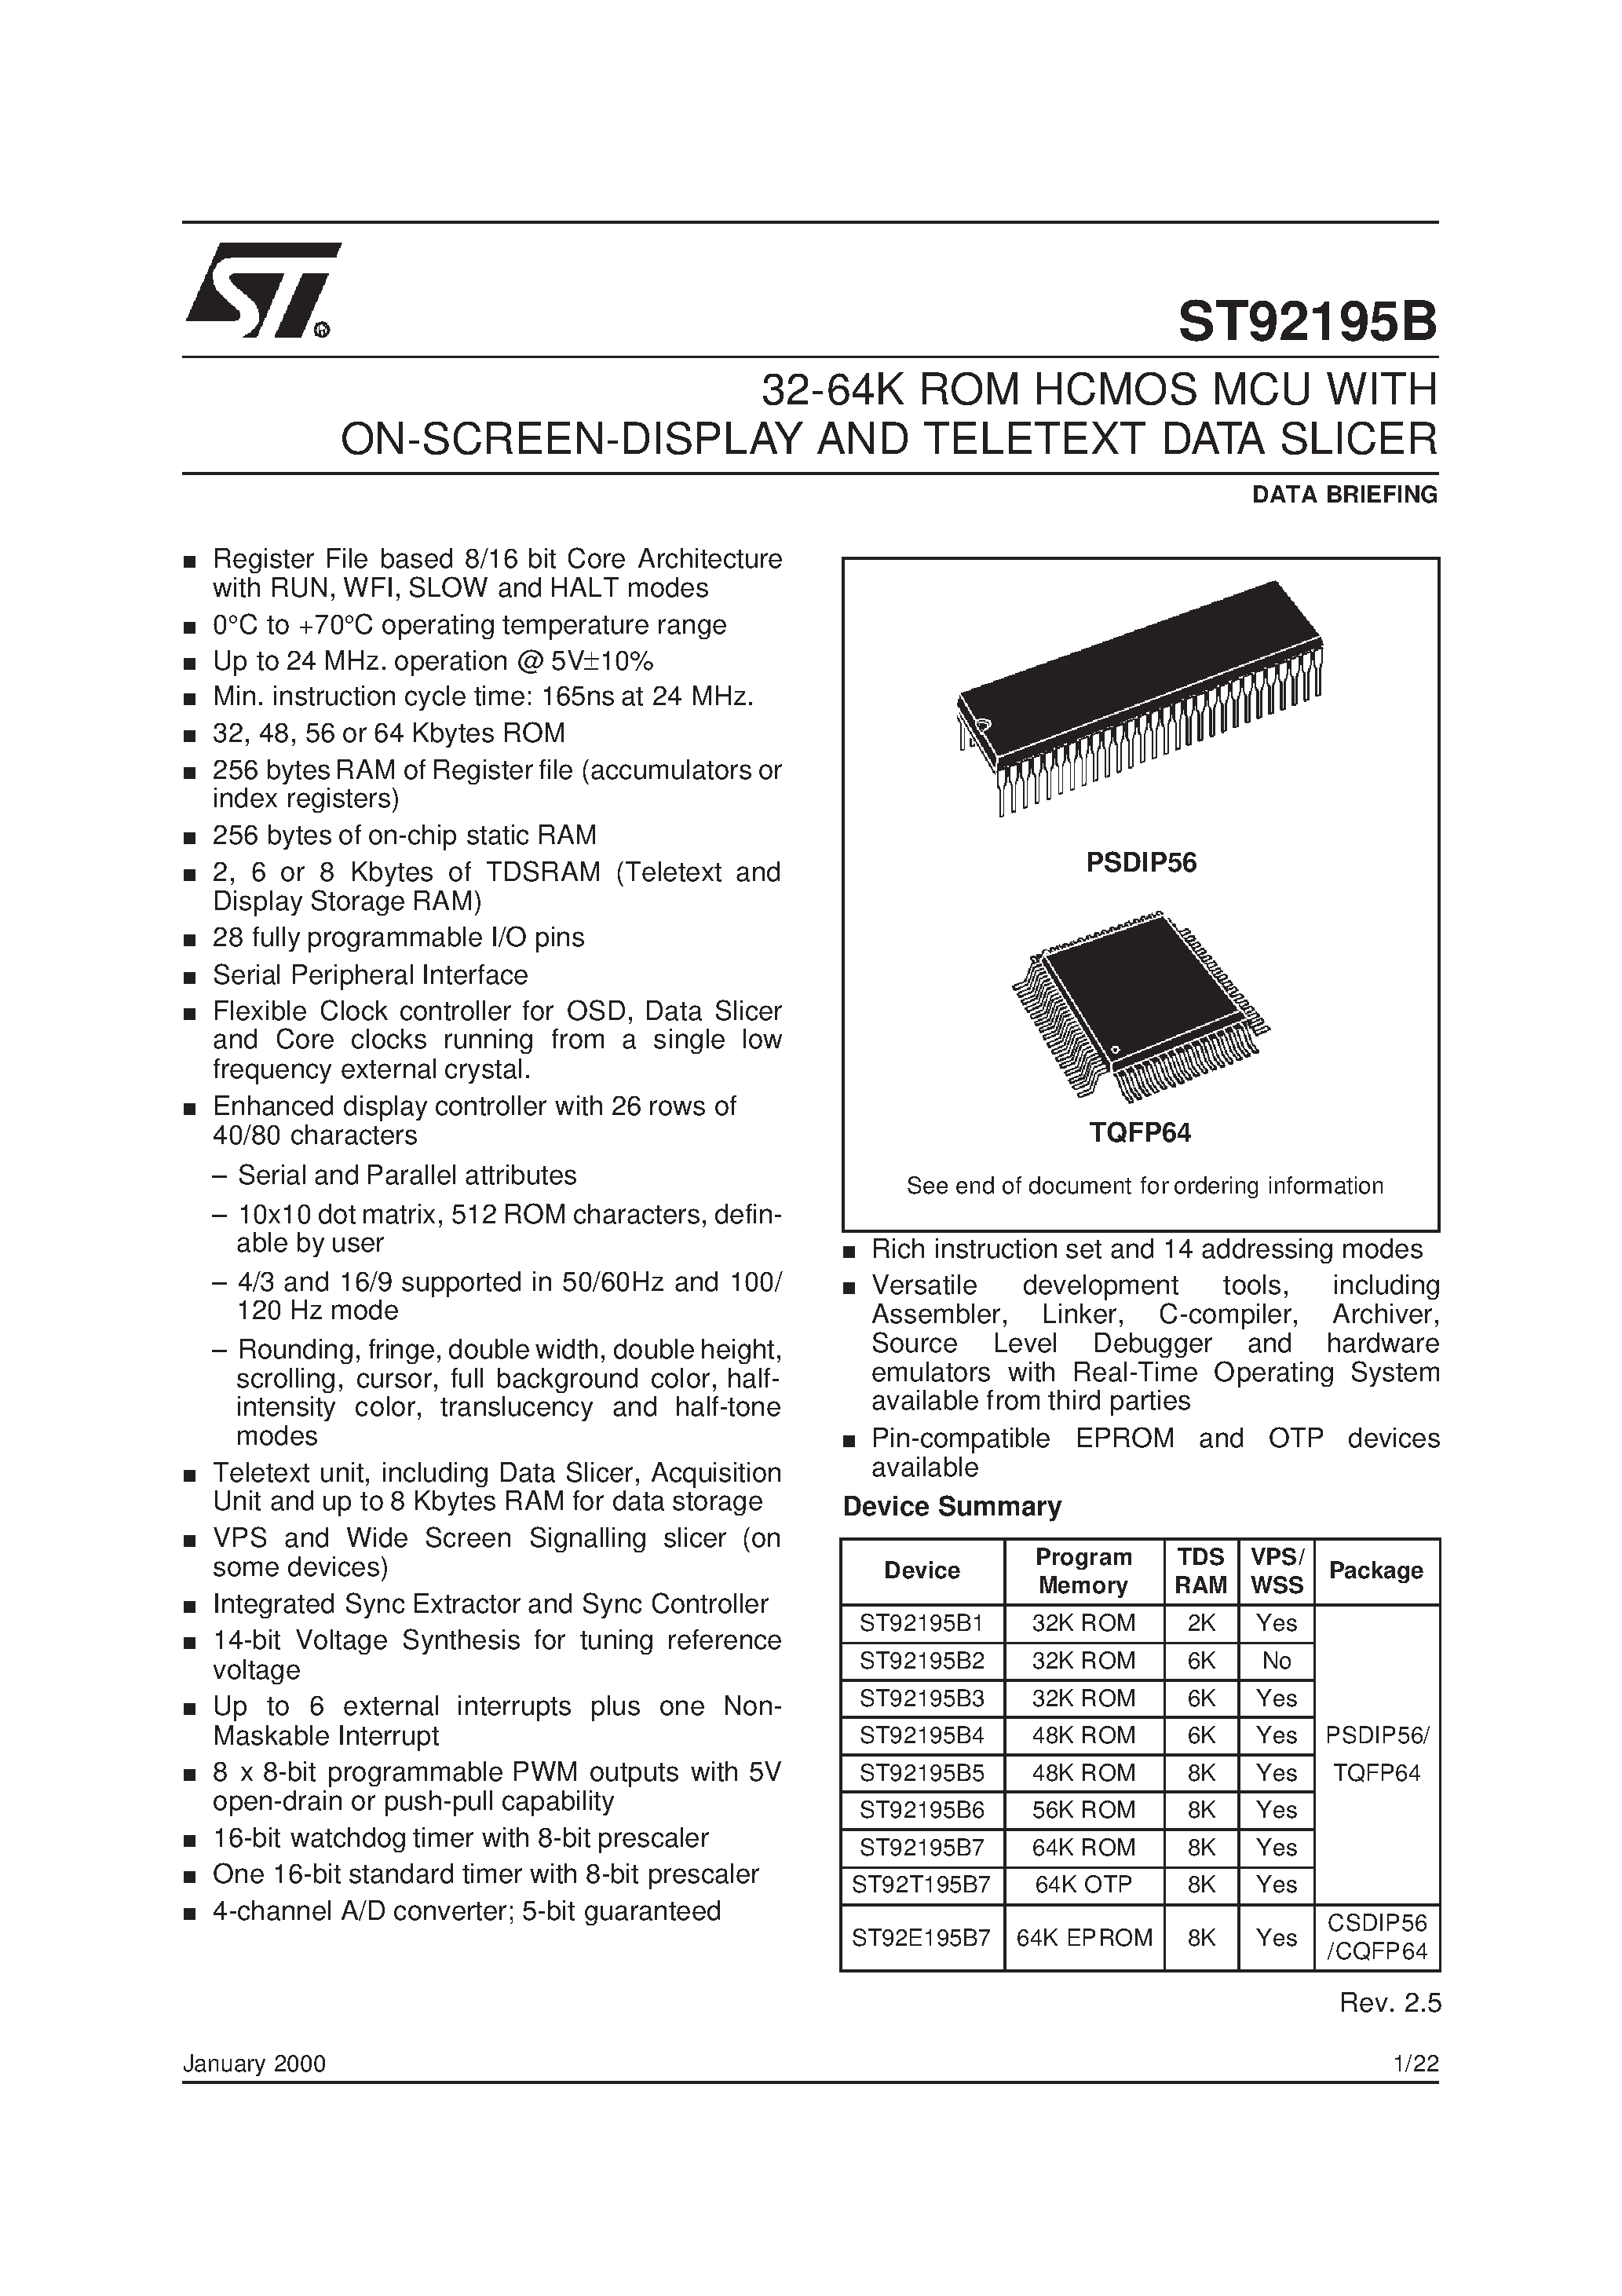 Даташит ST92195B - 32-64K ROM HCMOS MCU WITH ON-SCREEN-DISPLAY AND TELETEXT DATA SLICER страница 1